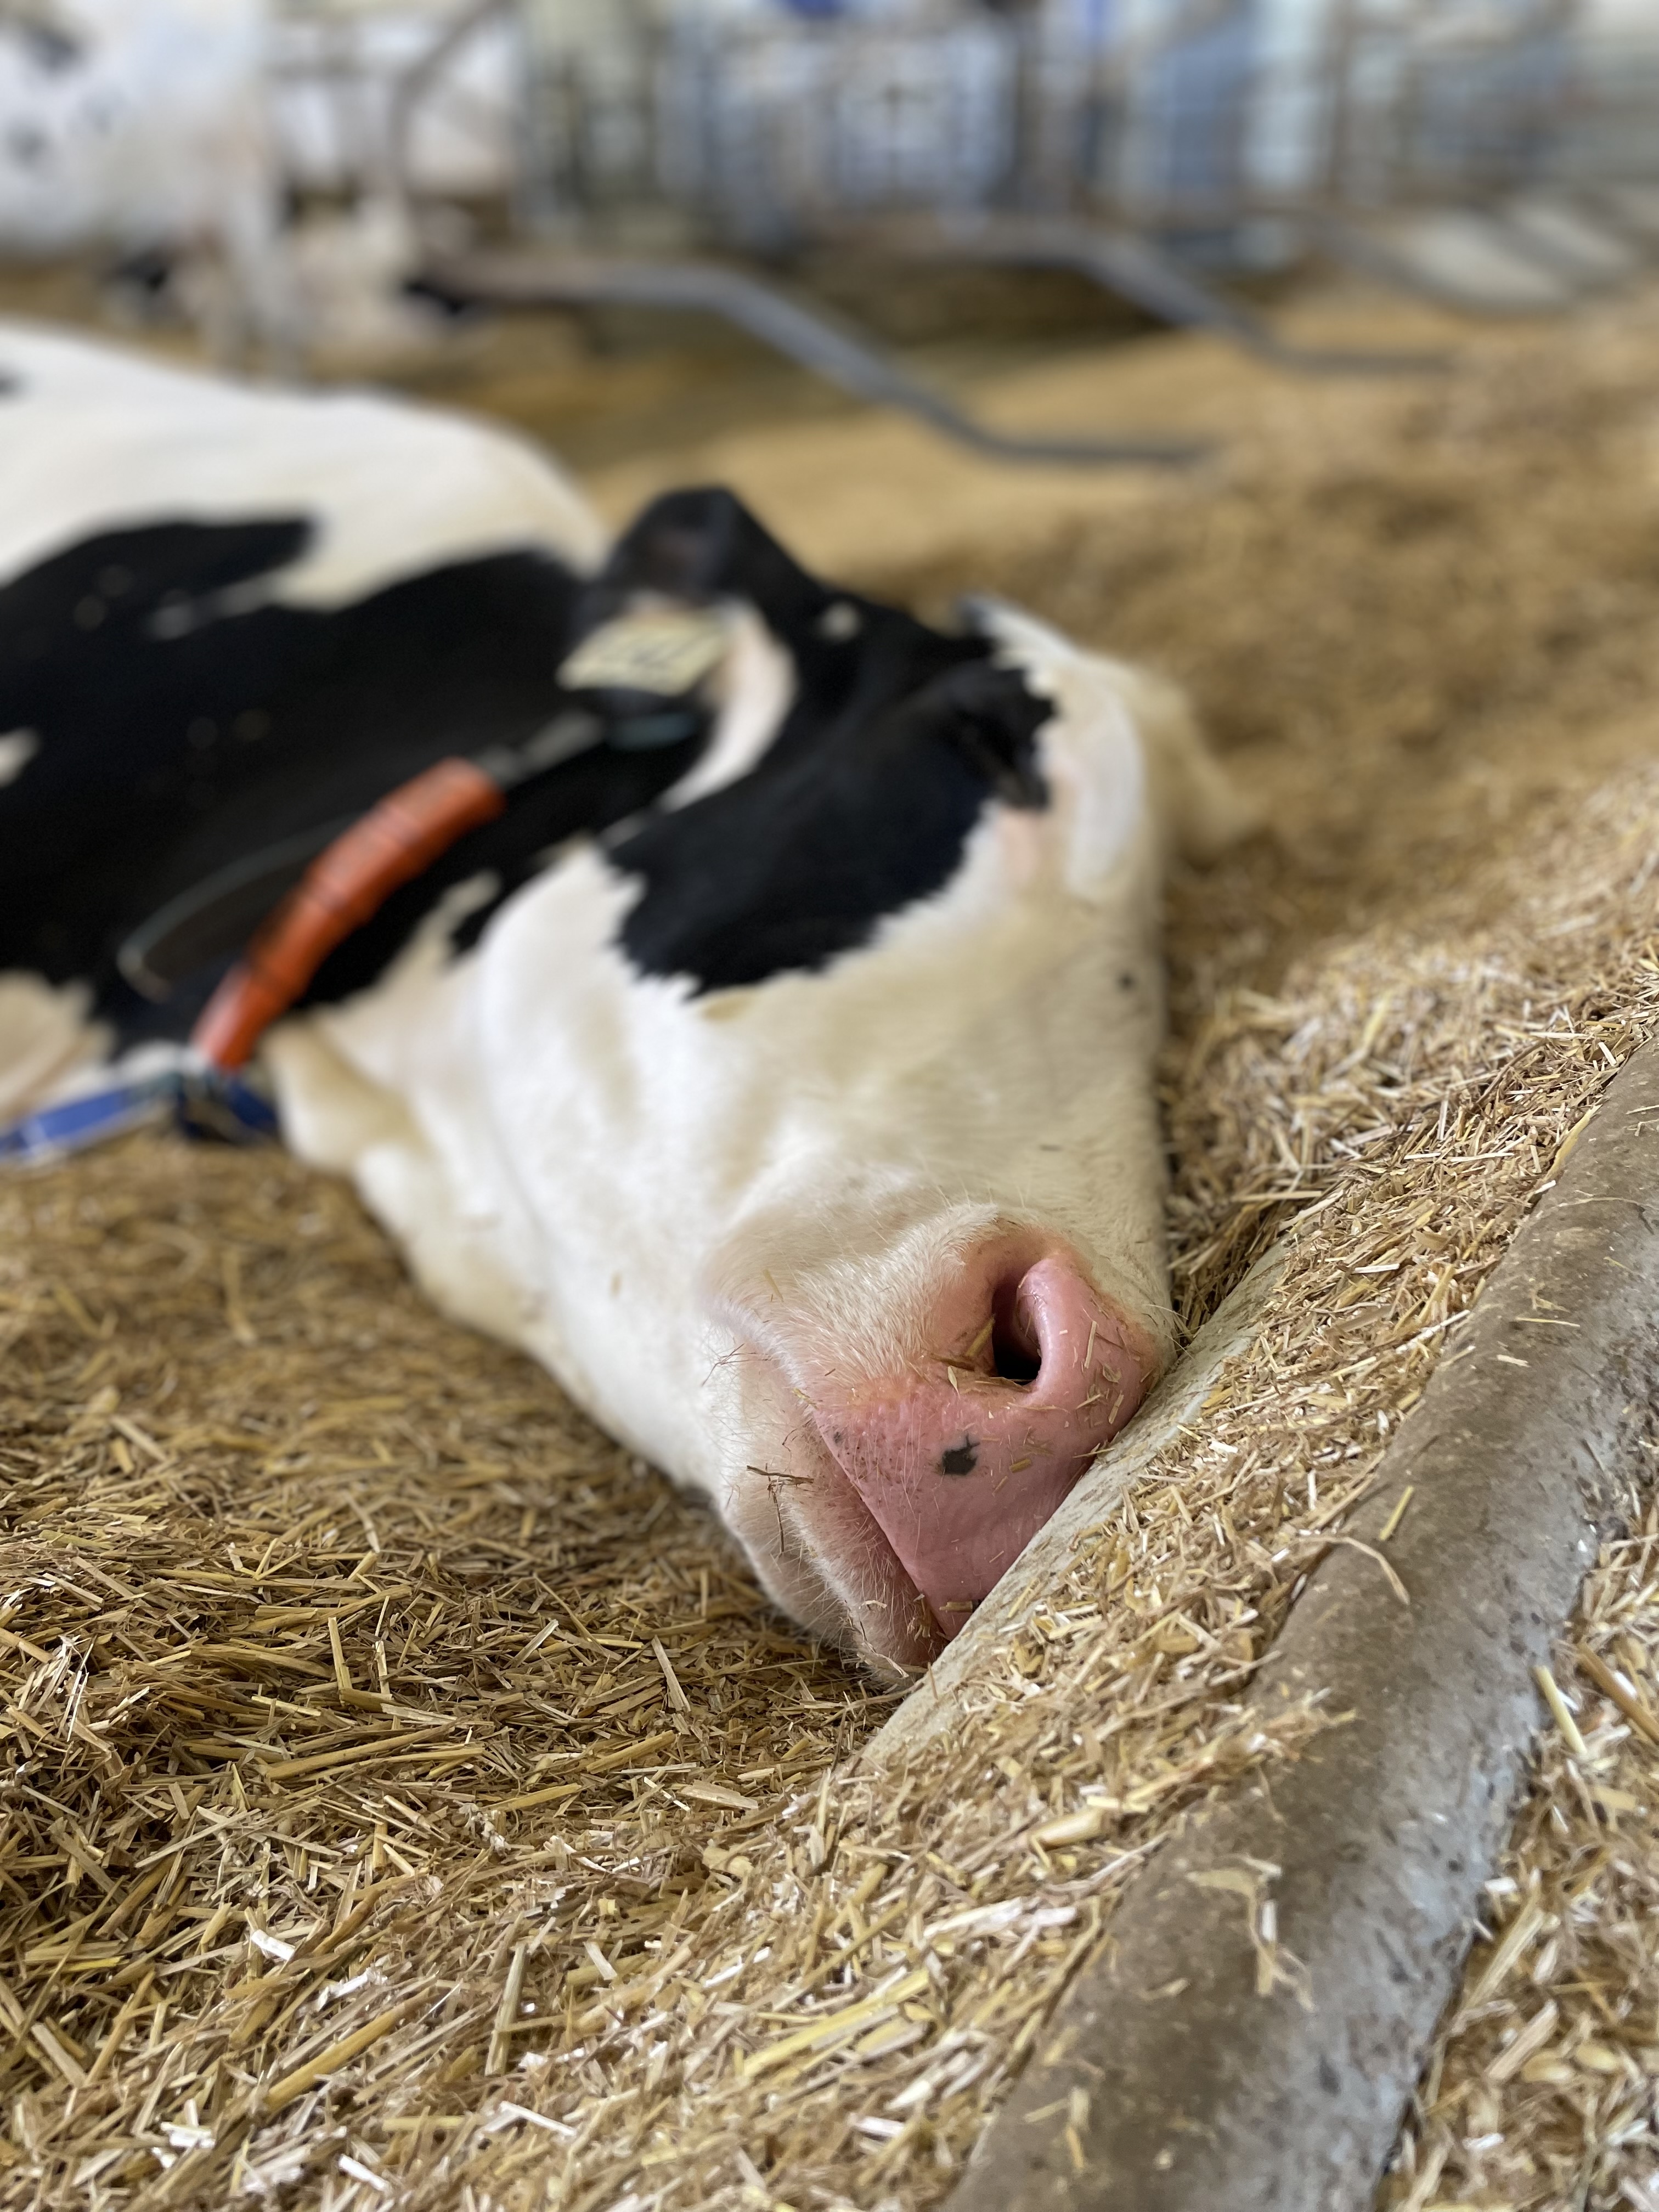 A dairy cow's black and white head laying on staw as it sleeps.